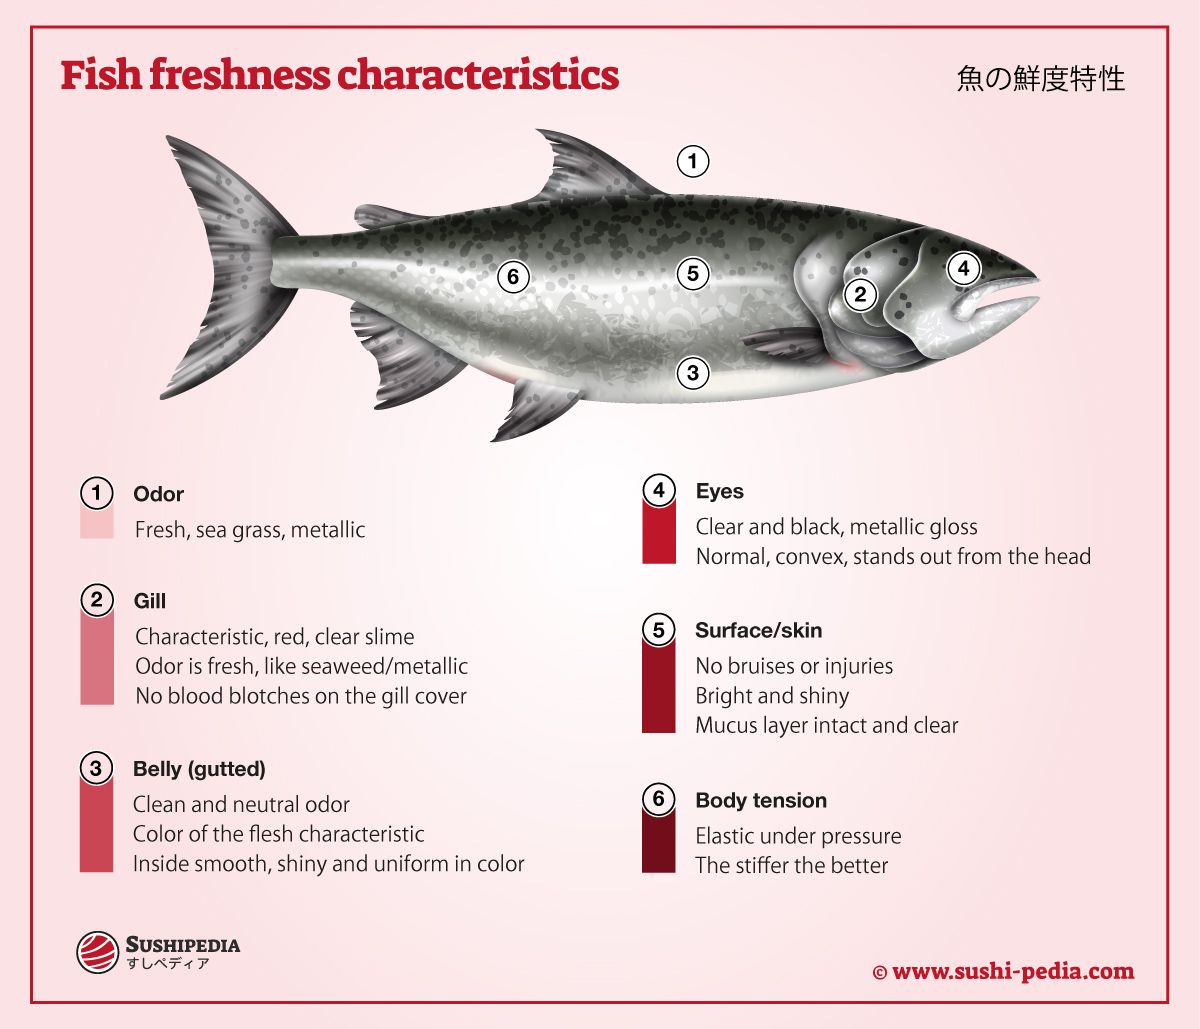 The graphic shows how to recognize fresh fish.